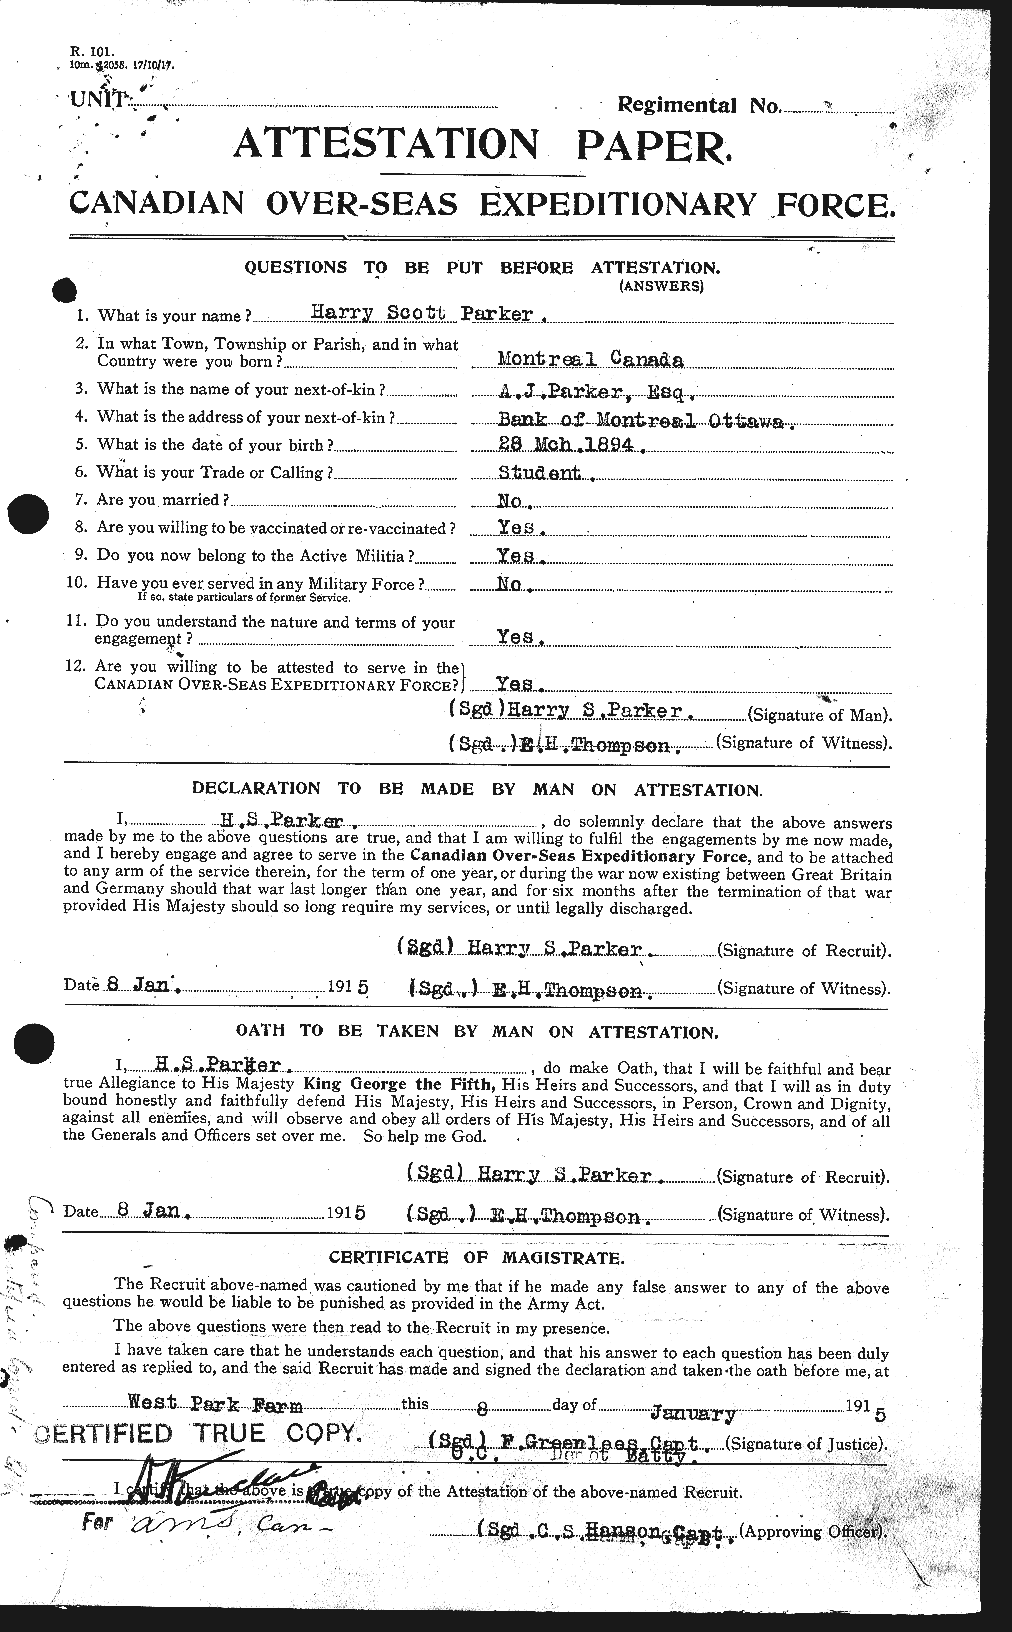 Personnel Records of the First World War - CEF 565337a